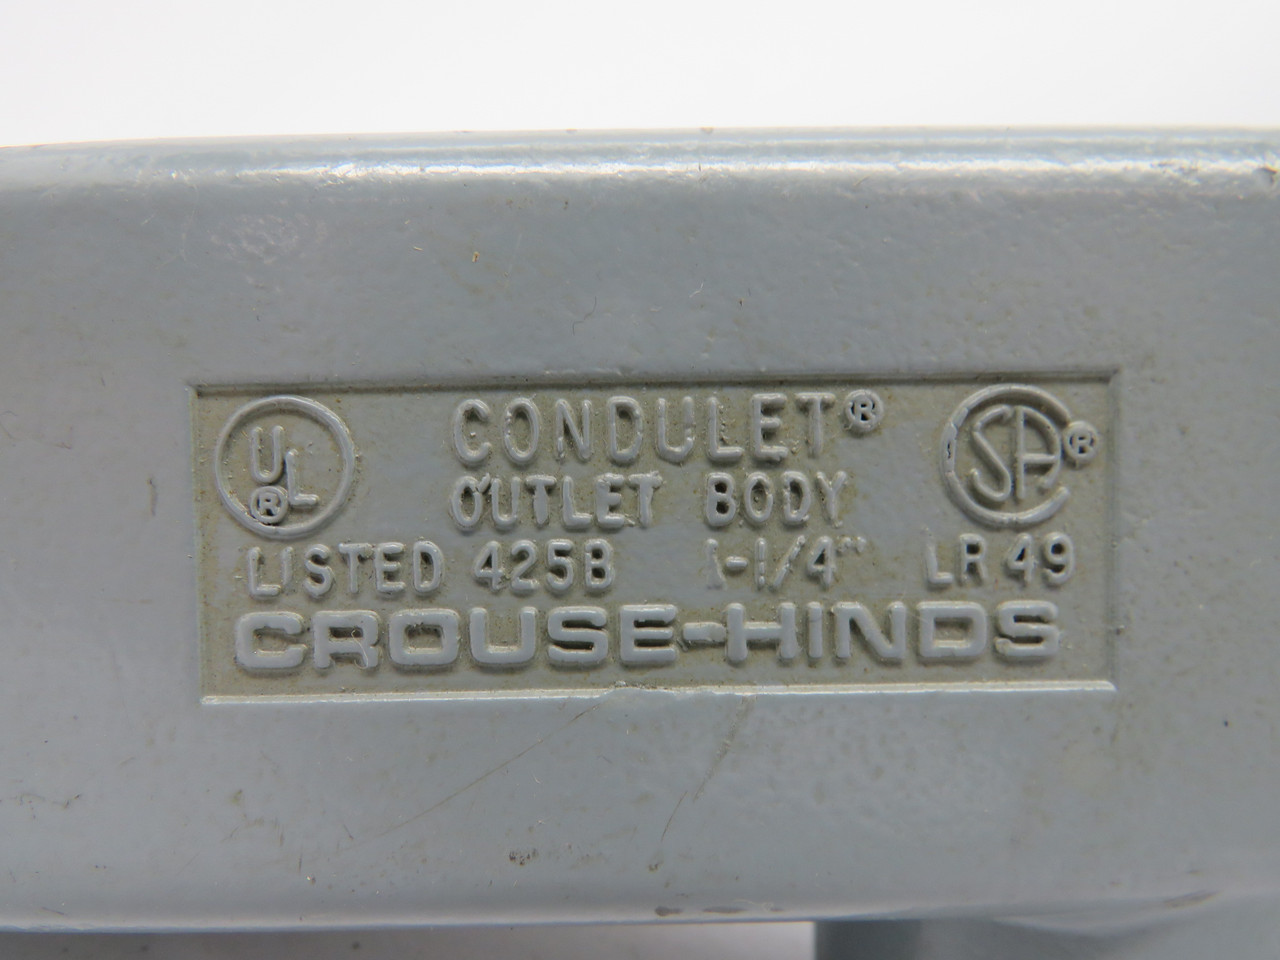 Crouse-Hinds LR49 Conduit Body 1-1/4" NO GASKET USED